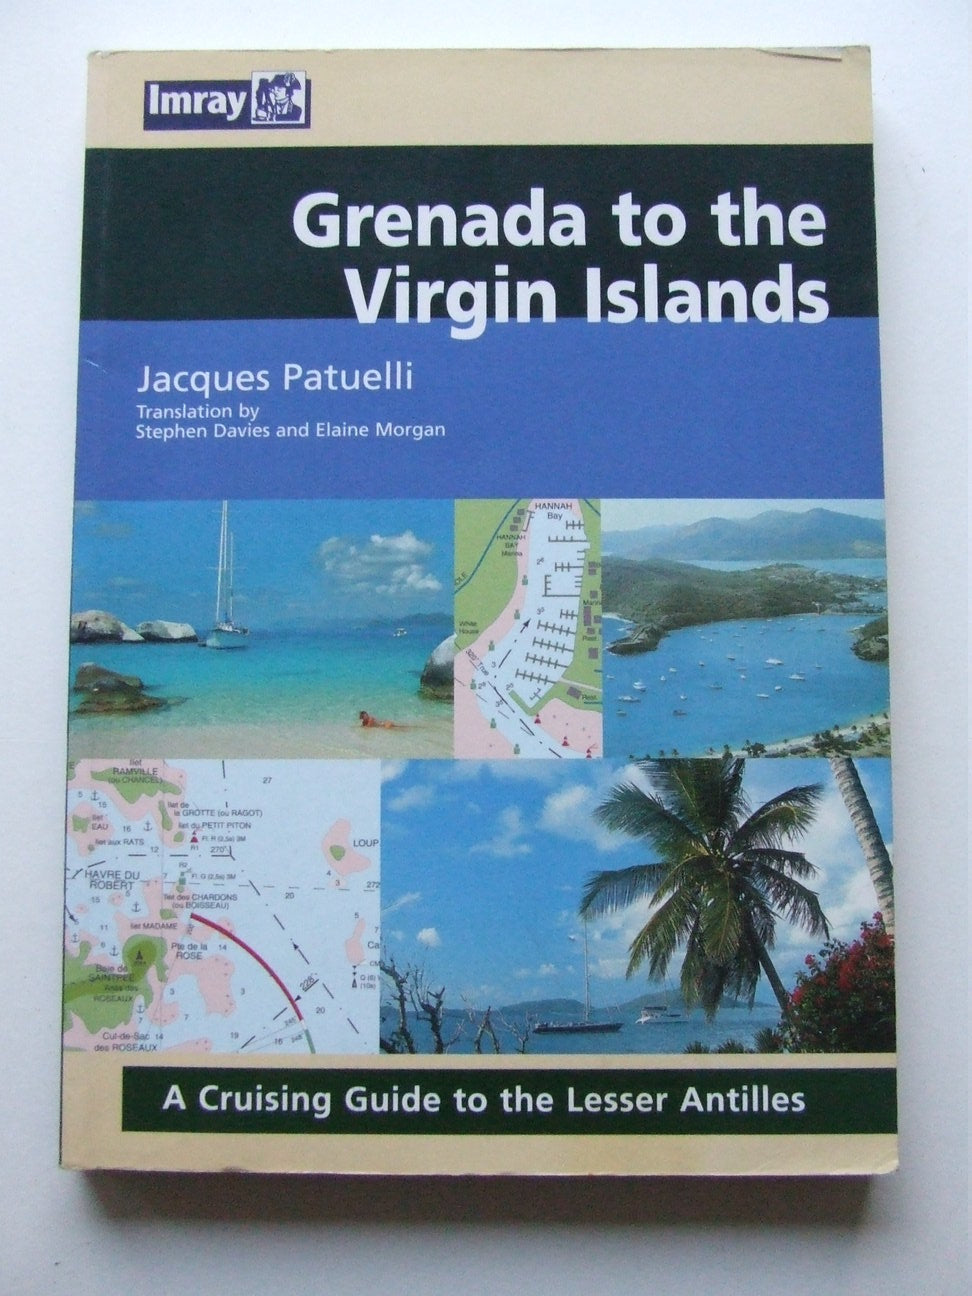 Grenada to the Virgin Islands, a cruising guide to the Lesser Antilles